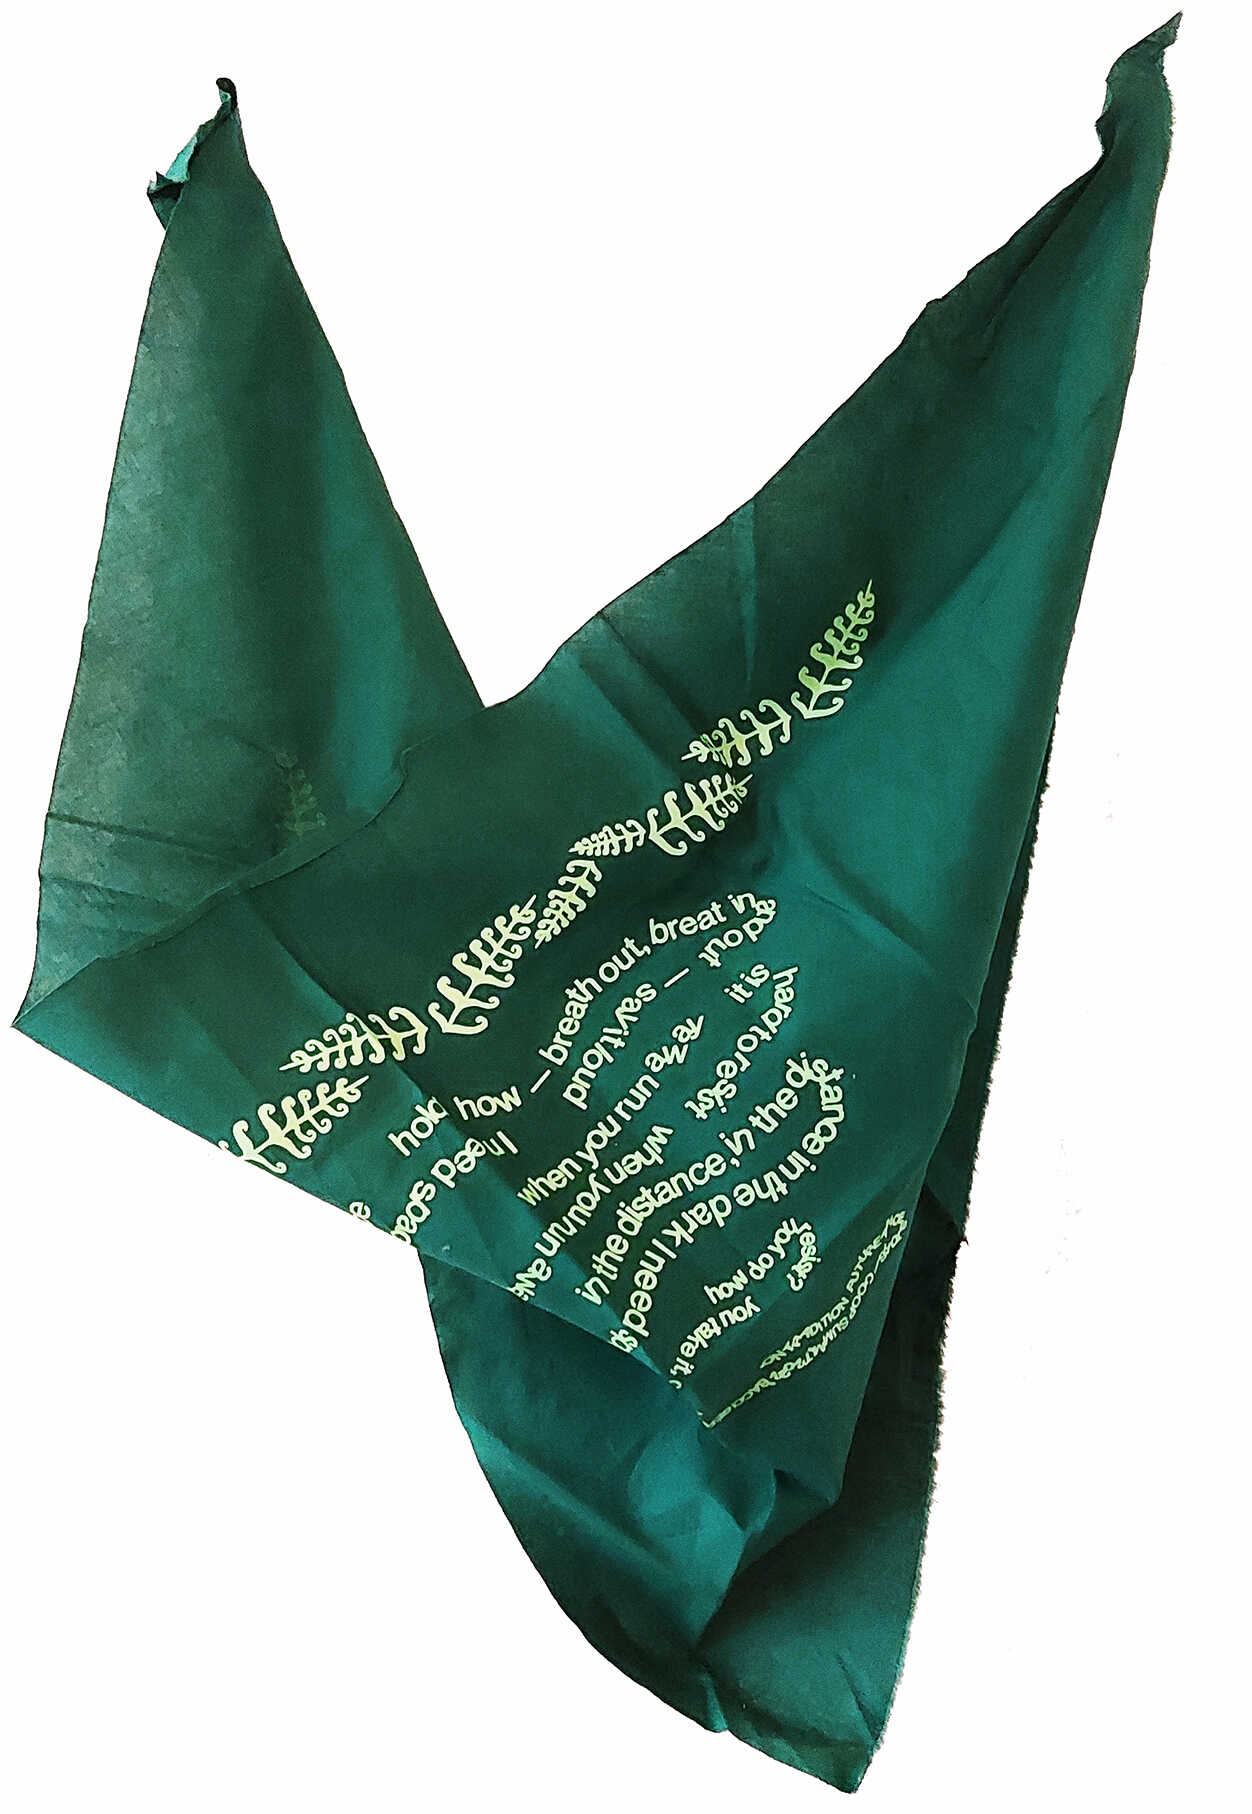 Green triangular bandana designed by COOP study group On Tradition - Future Ancestors 2: Rurality and Law for 2021- 2022 ~ COOP SUMMIT ~ collaborative research presentations in Bergamo & Milan.